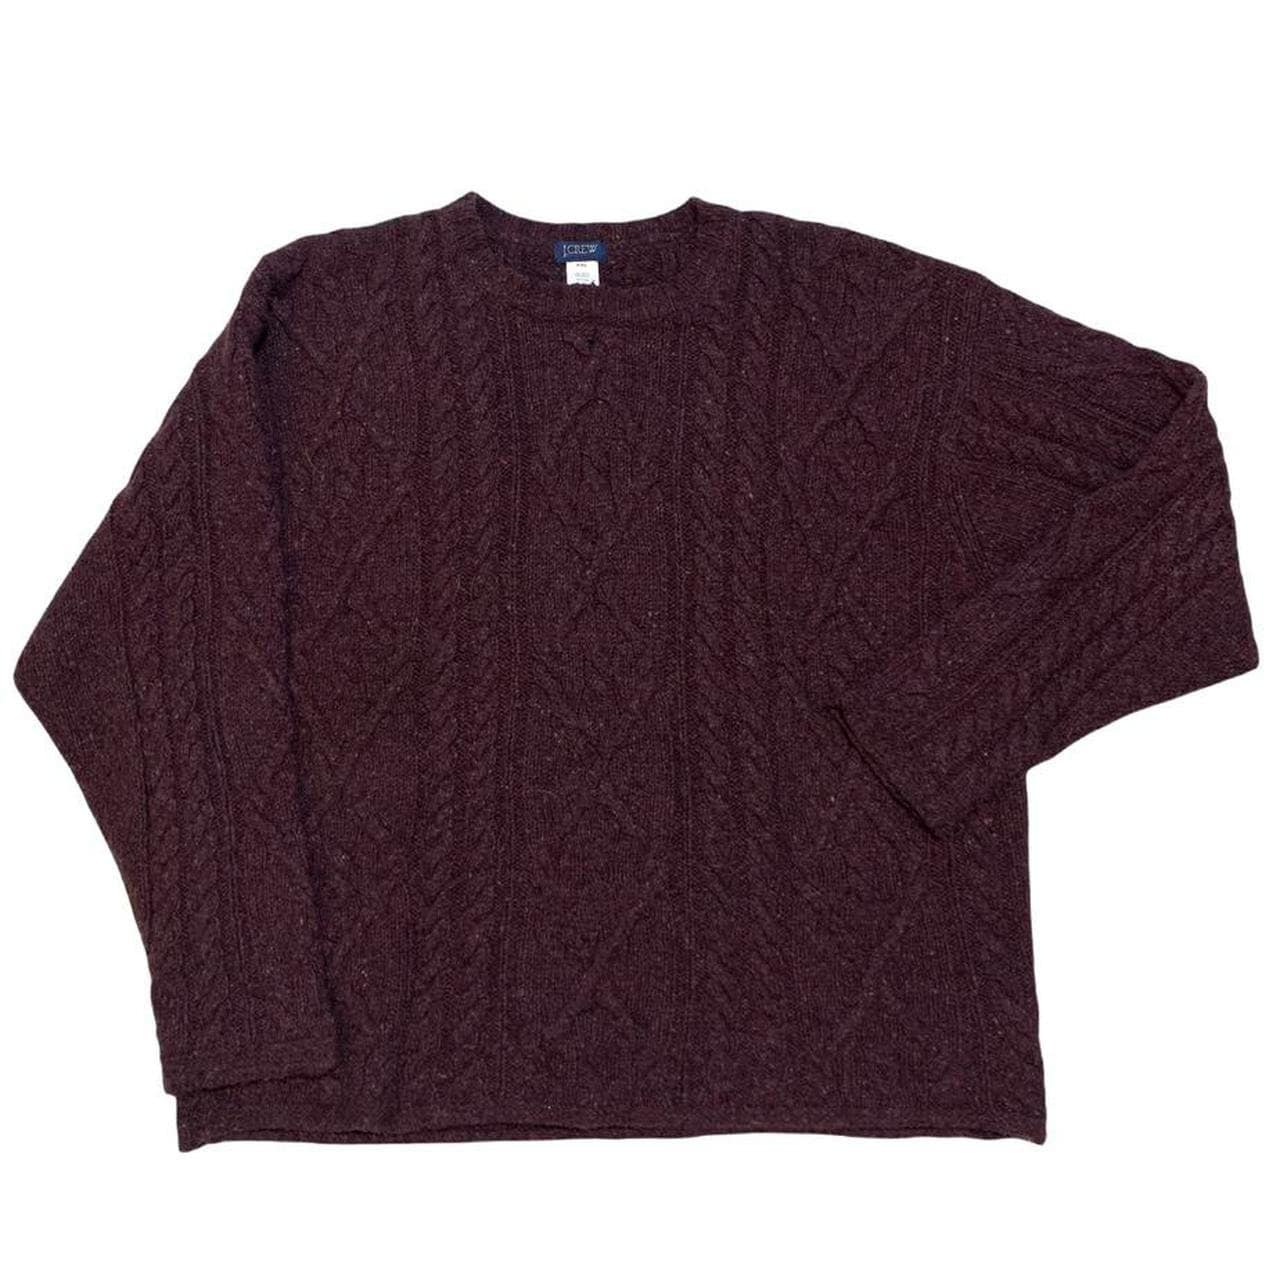 J.crew 90s VTG Burgandy Wool Cable Knit Crew Neck Pullover Sweater Jumper  XXL 